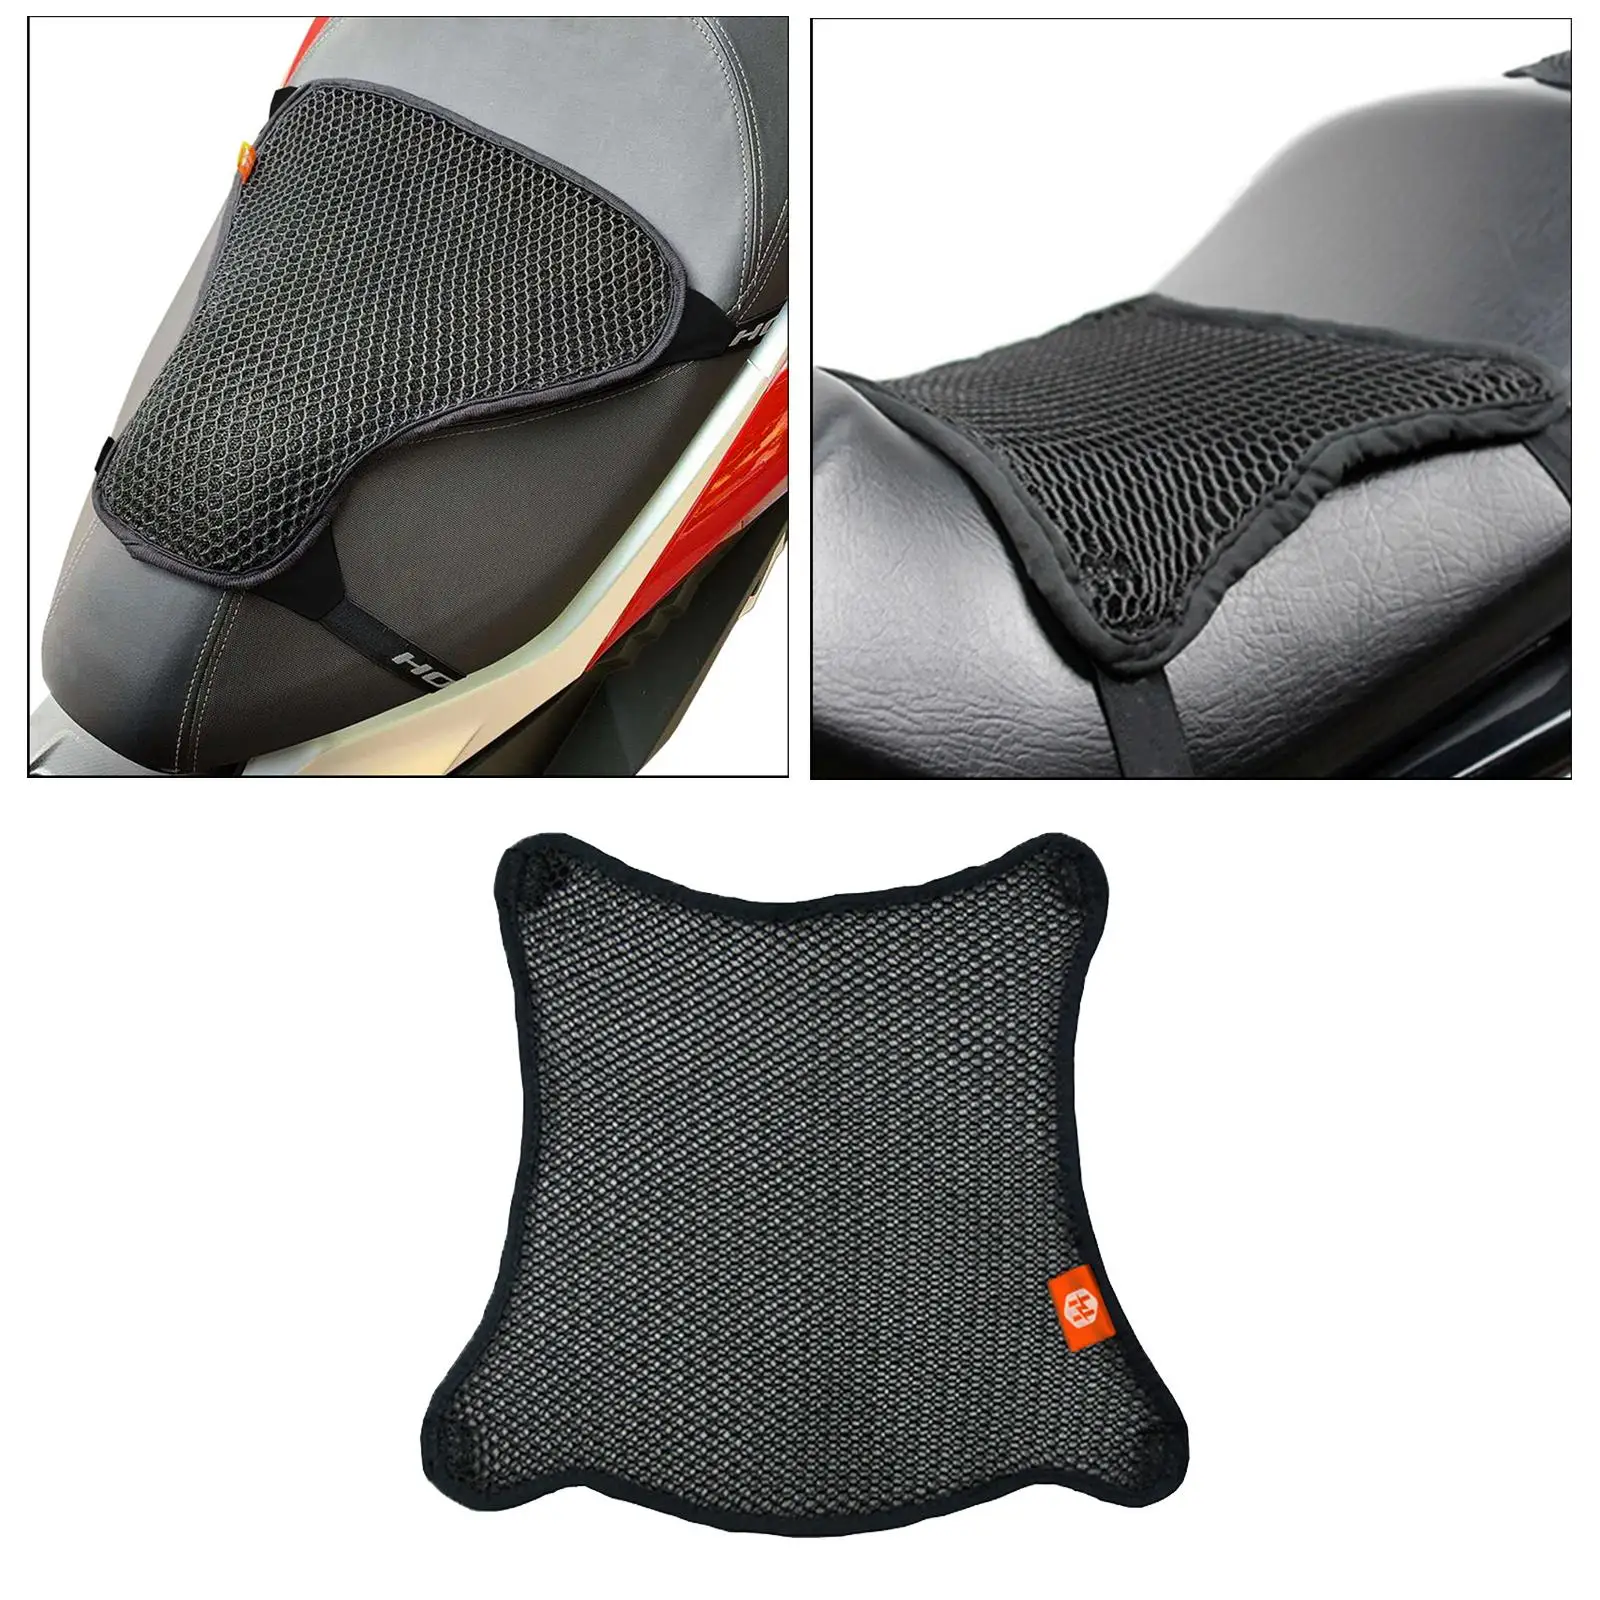 Summer Motorcycle Seat Cushion Protector Reduces Pressure and Fatigue